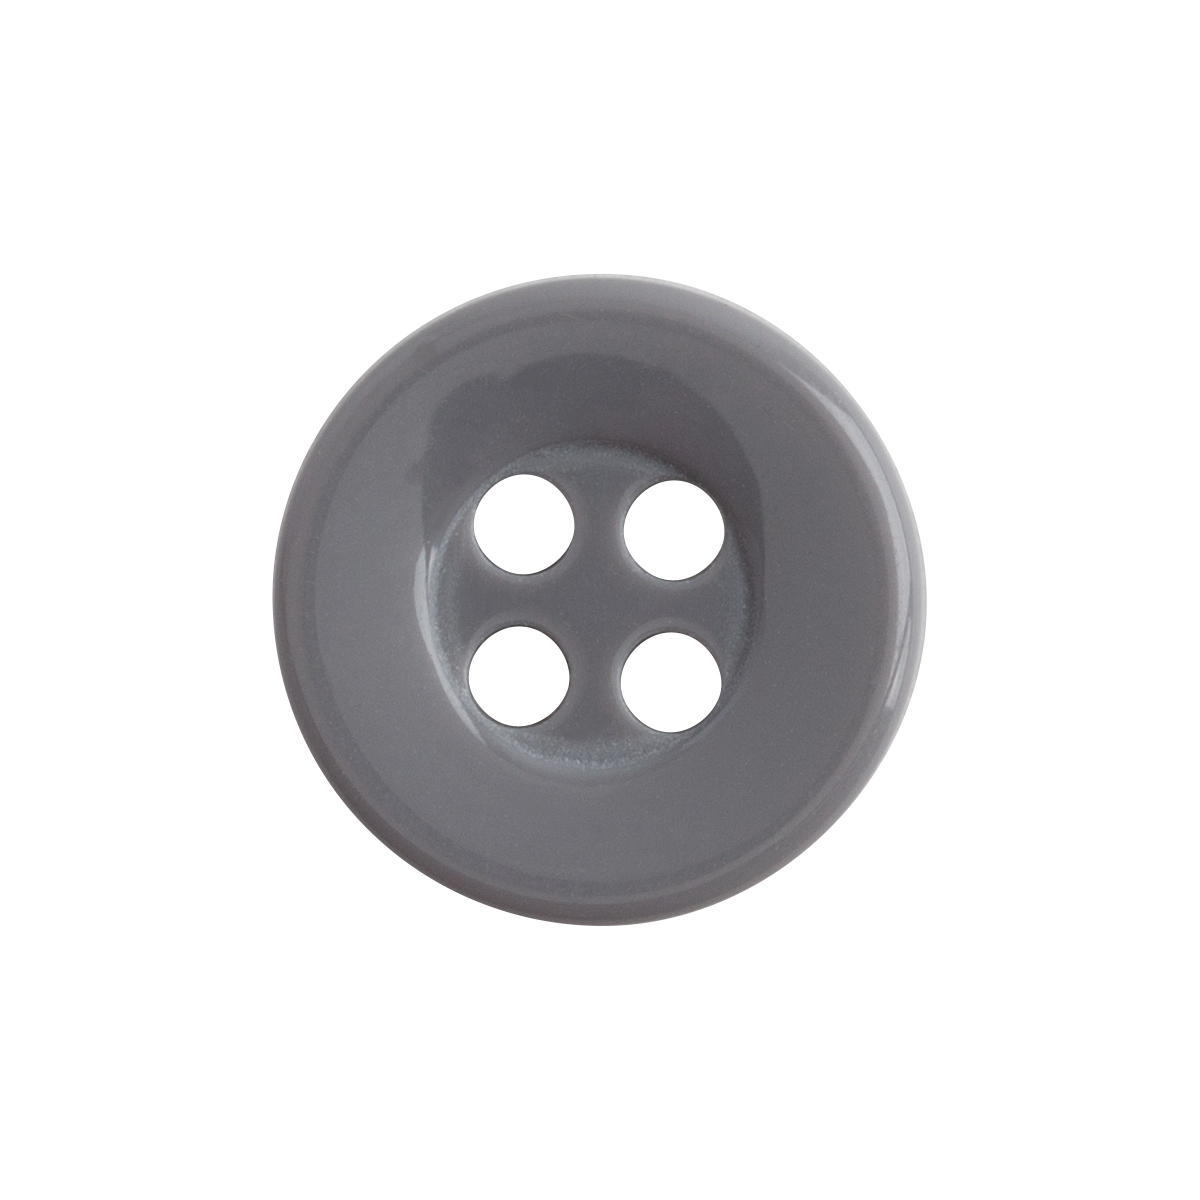 Dark Brown Buttons 20L Buttons 4 Hole Round Button Buttons for Craft Heavy  Duty Shirt Buttons Plastic Buttons Pack of 12